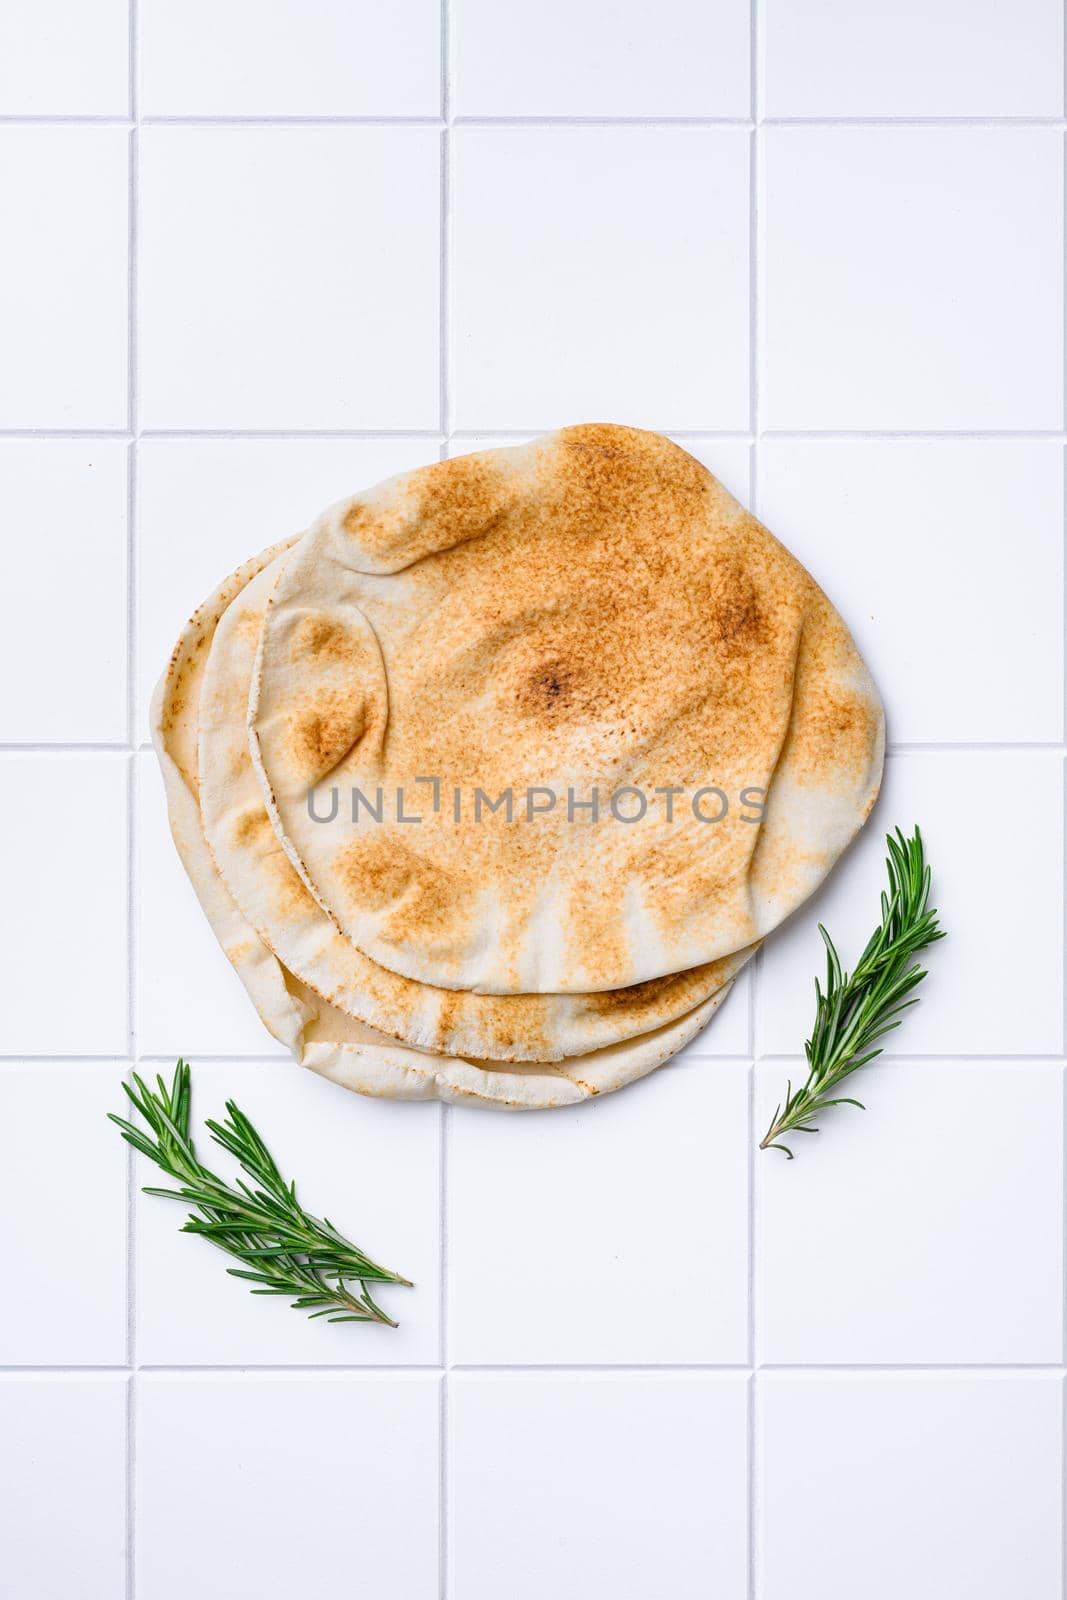 Freshly baked pita bread, on white ceramic squared tile table background, top view flat lay, with copy space for text